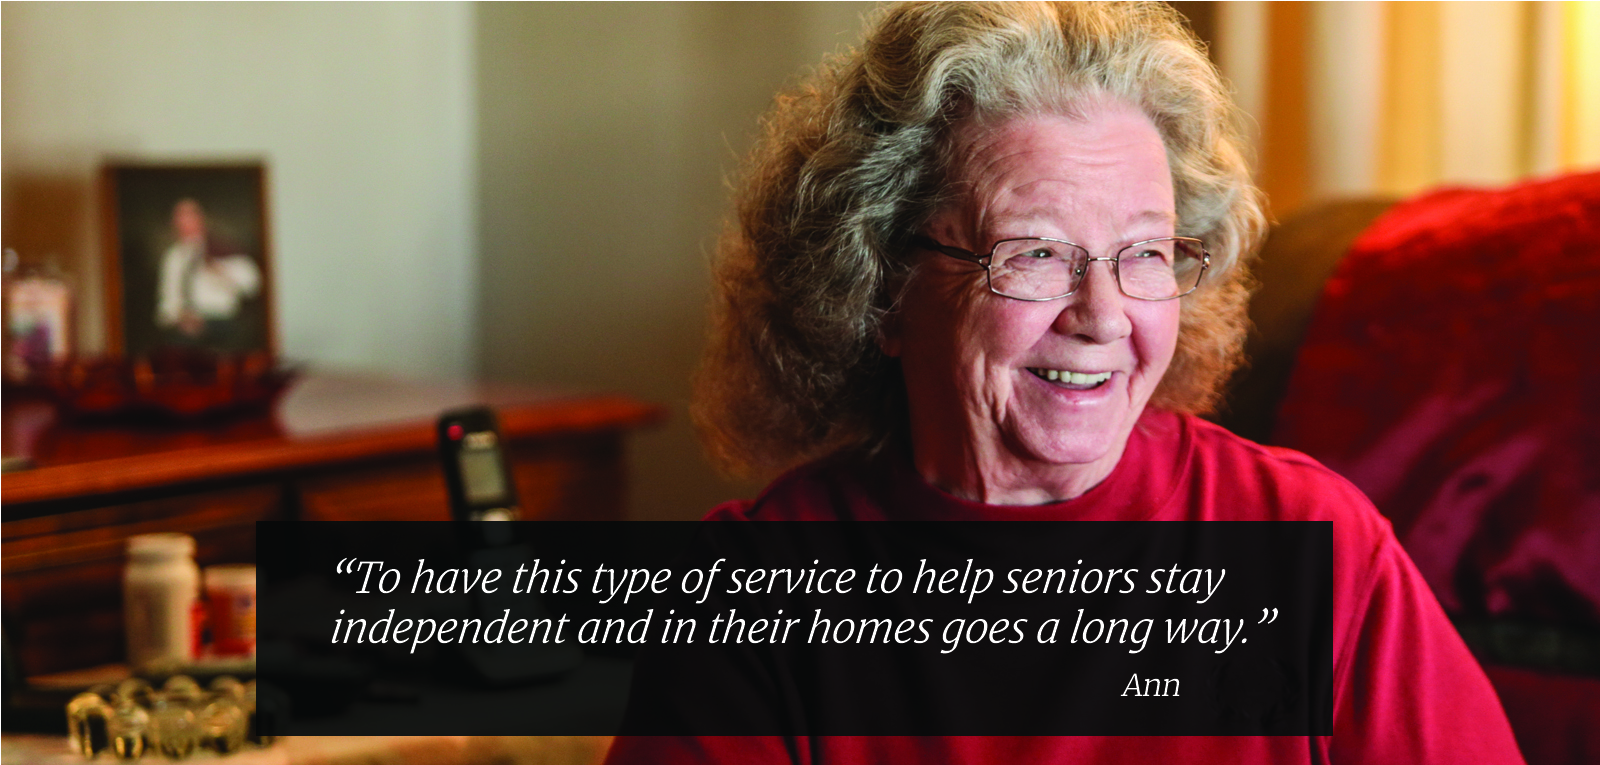 To have this type of service to help seniors stay independent and in their homes goes a long way. Ann